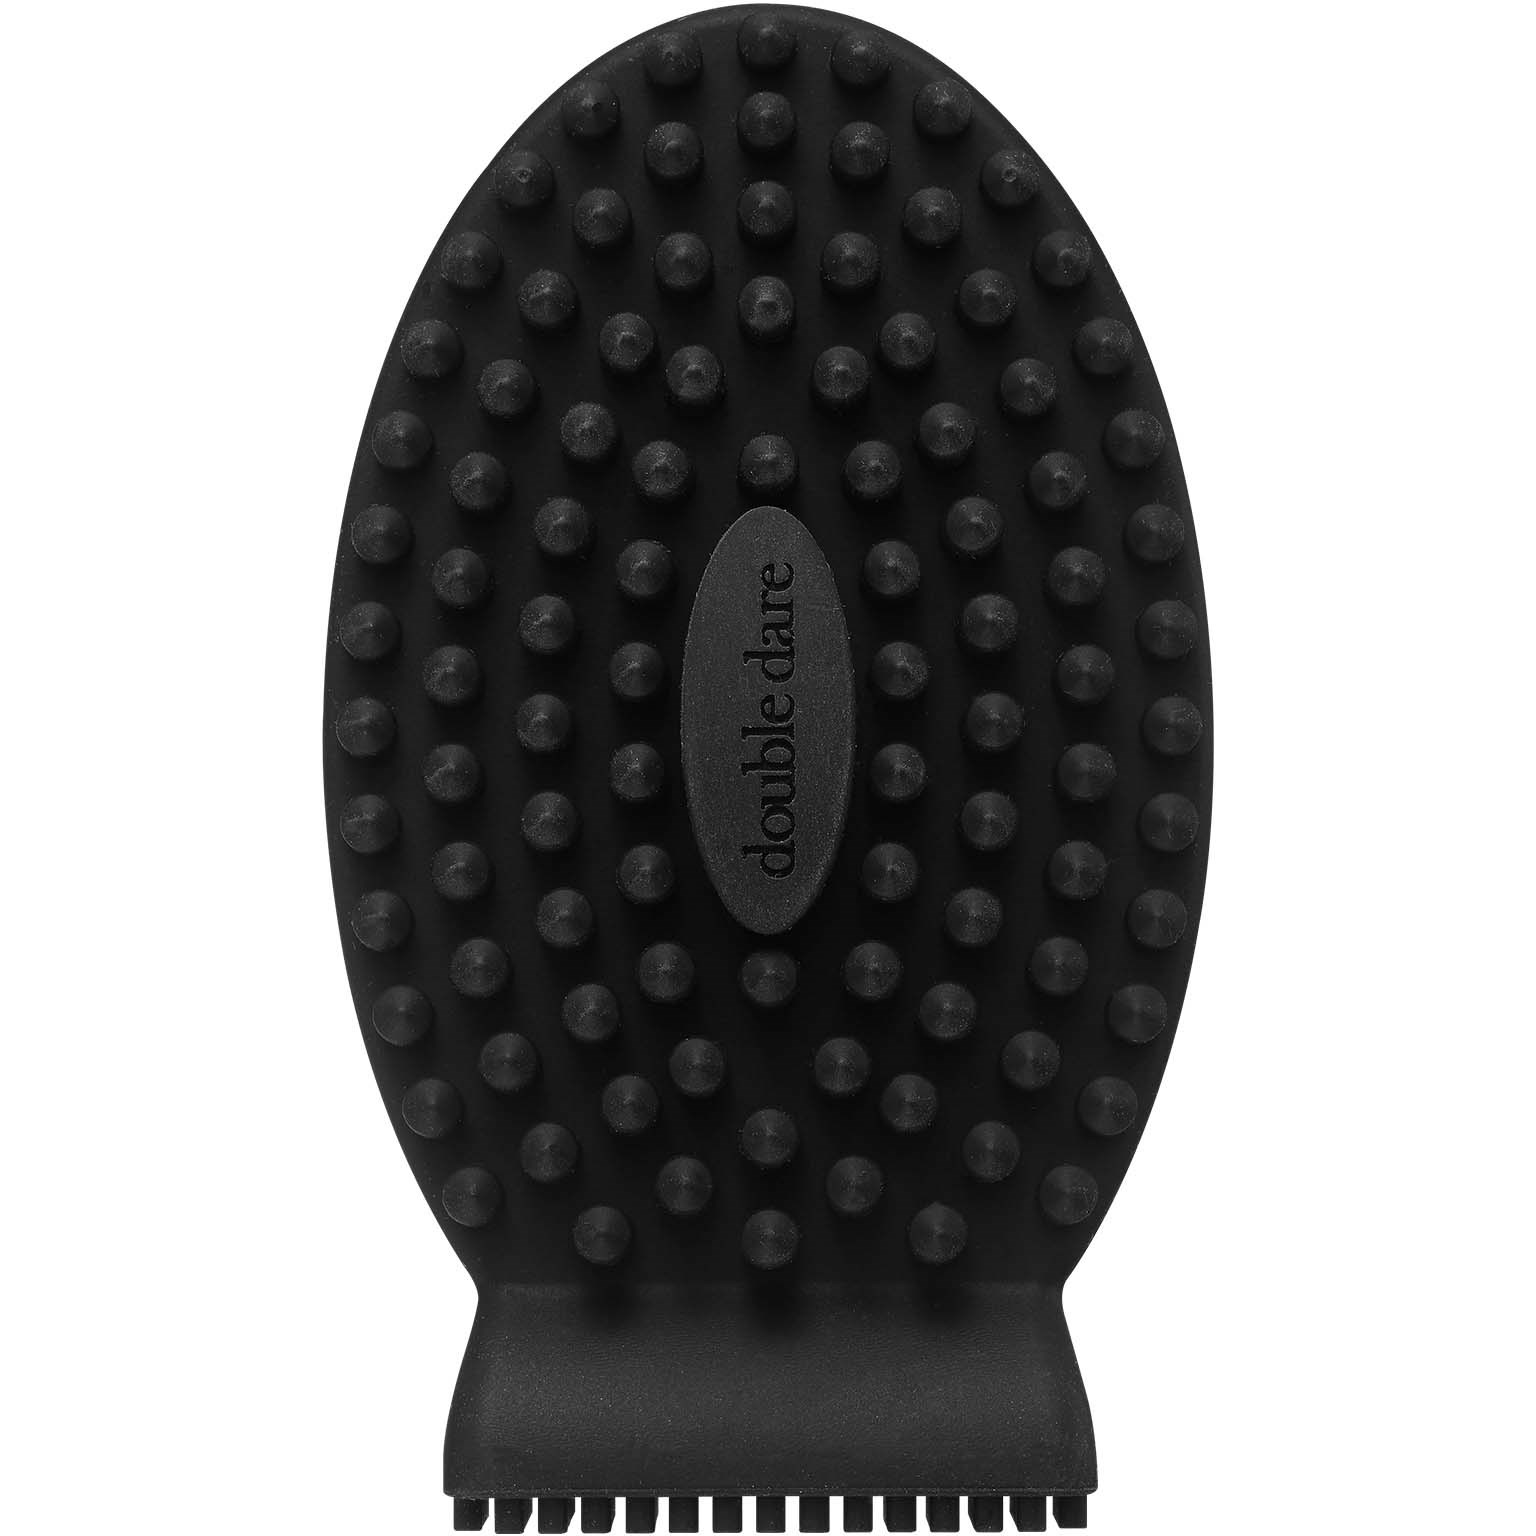 OMG! Double Dare I.M. Buddy Silicon Body Cleansing Tool Black